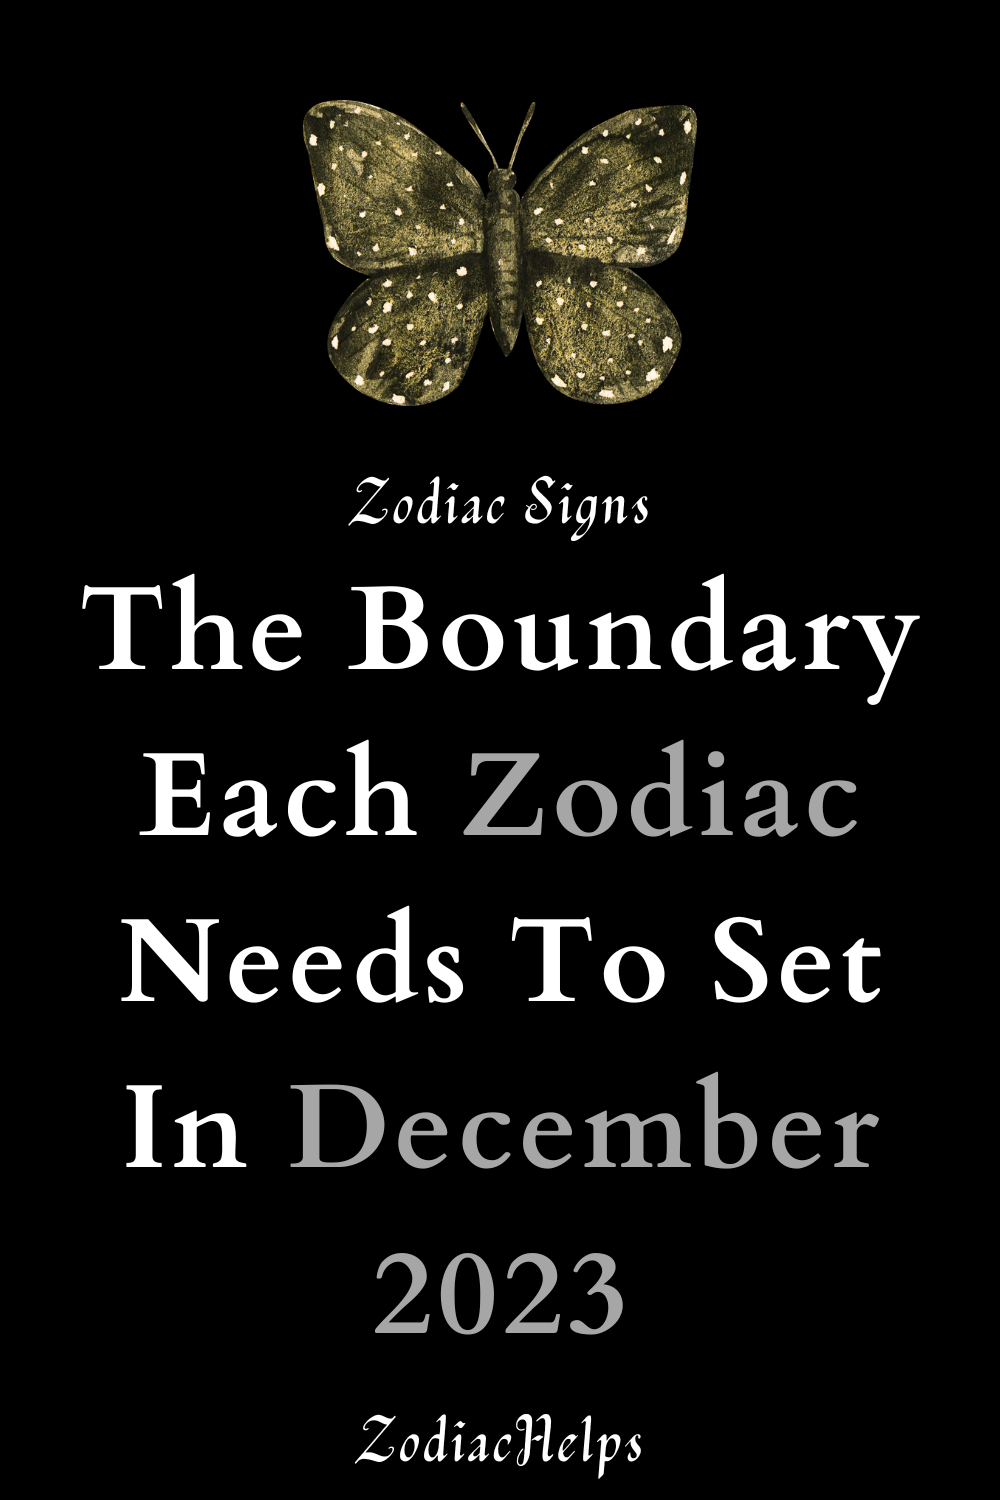 The Boundary Each Zodiac Needs To Set In December 2023